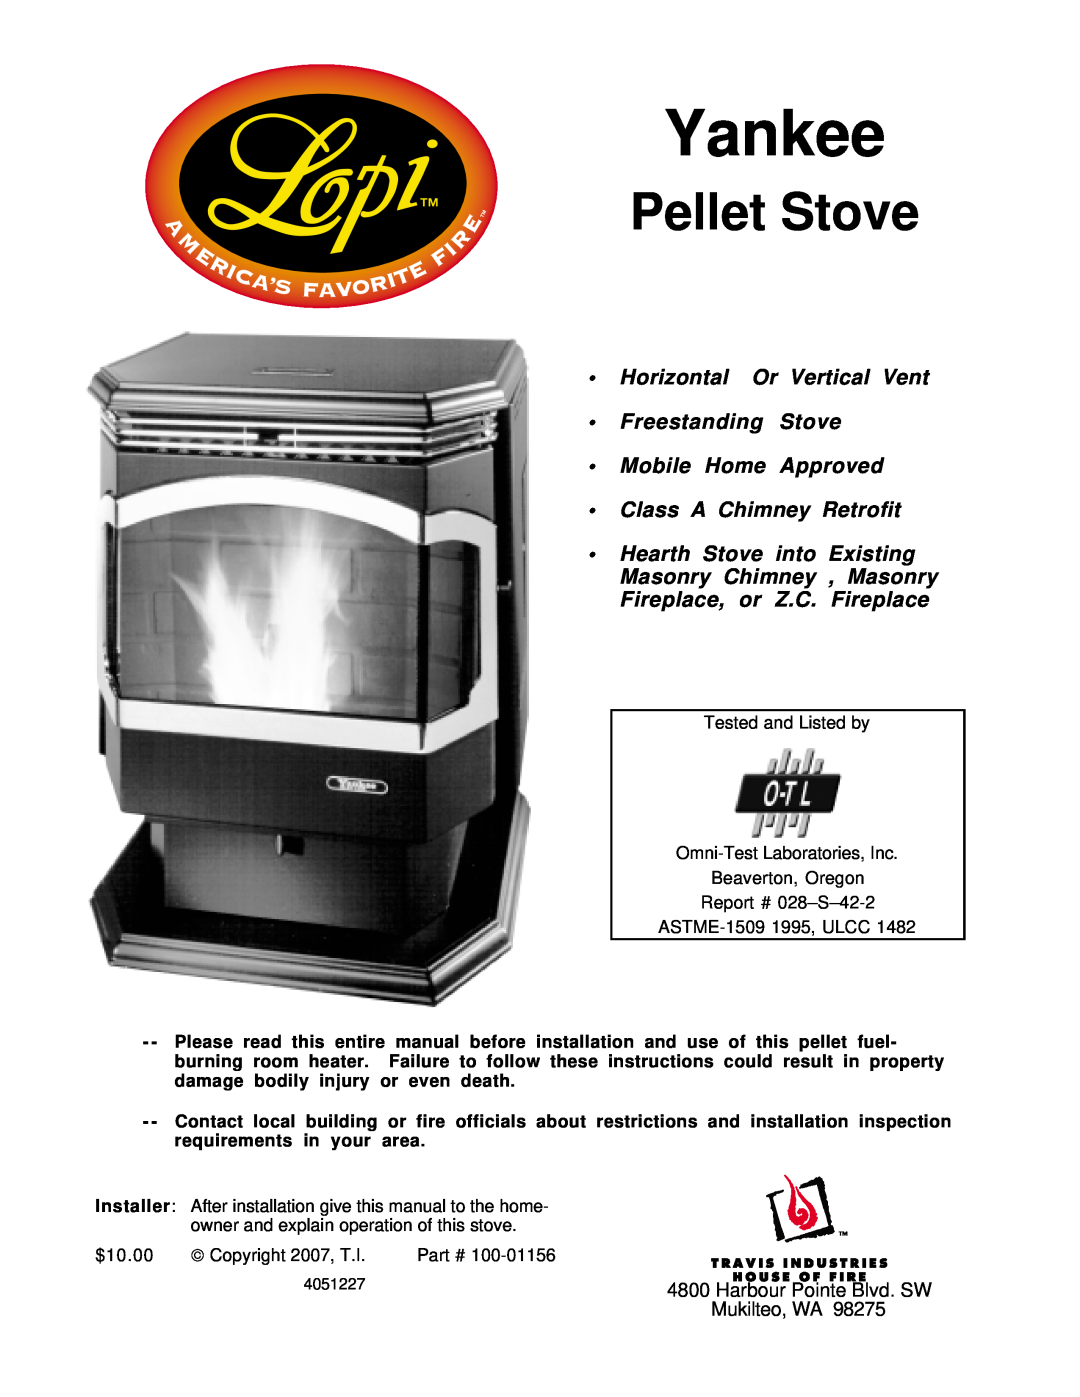 Lopi Horizontal Or Vertical Vent Freestanding Stove Yankee Pellet Stove manual Freestanding Stove Mobile Home Approved 